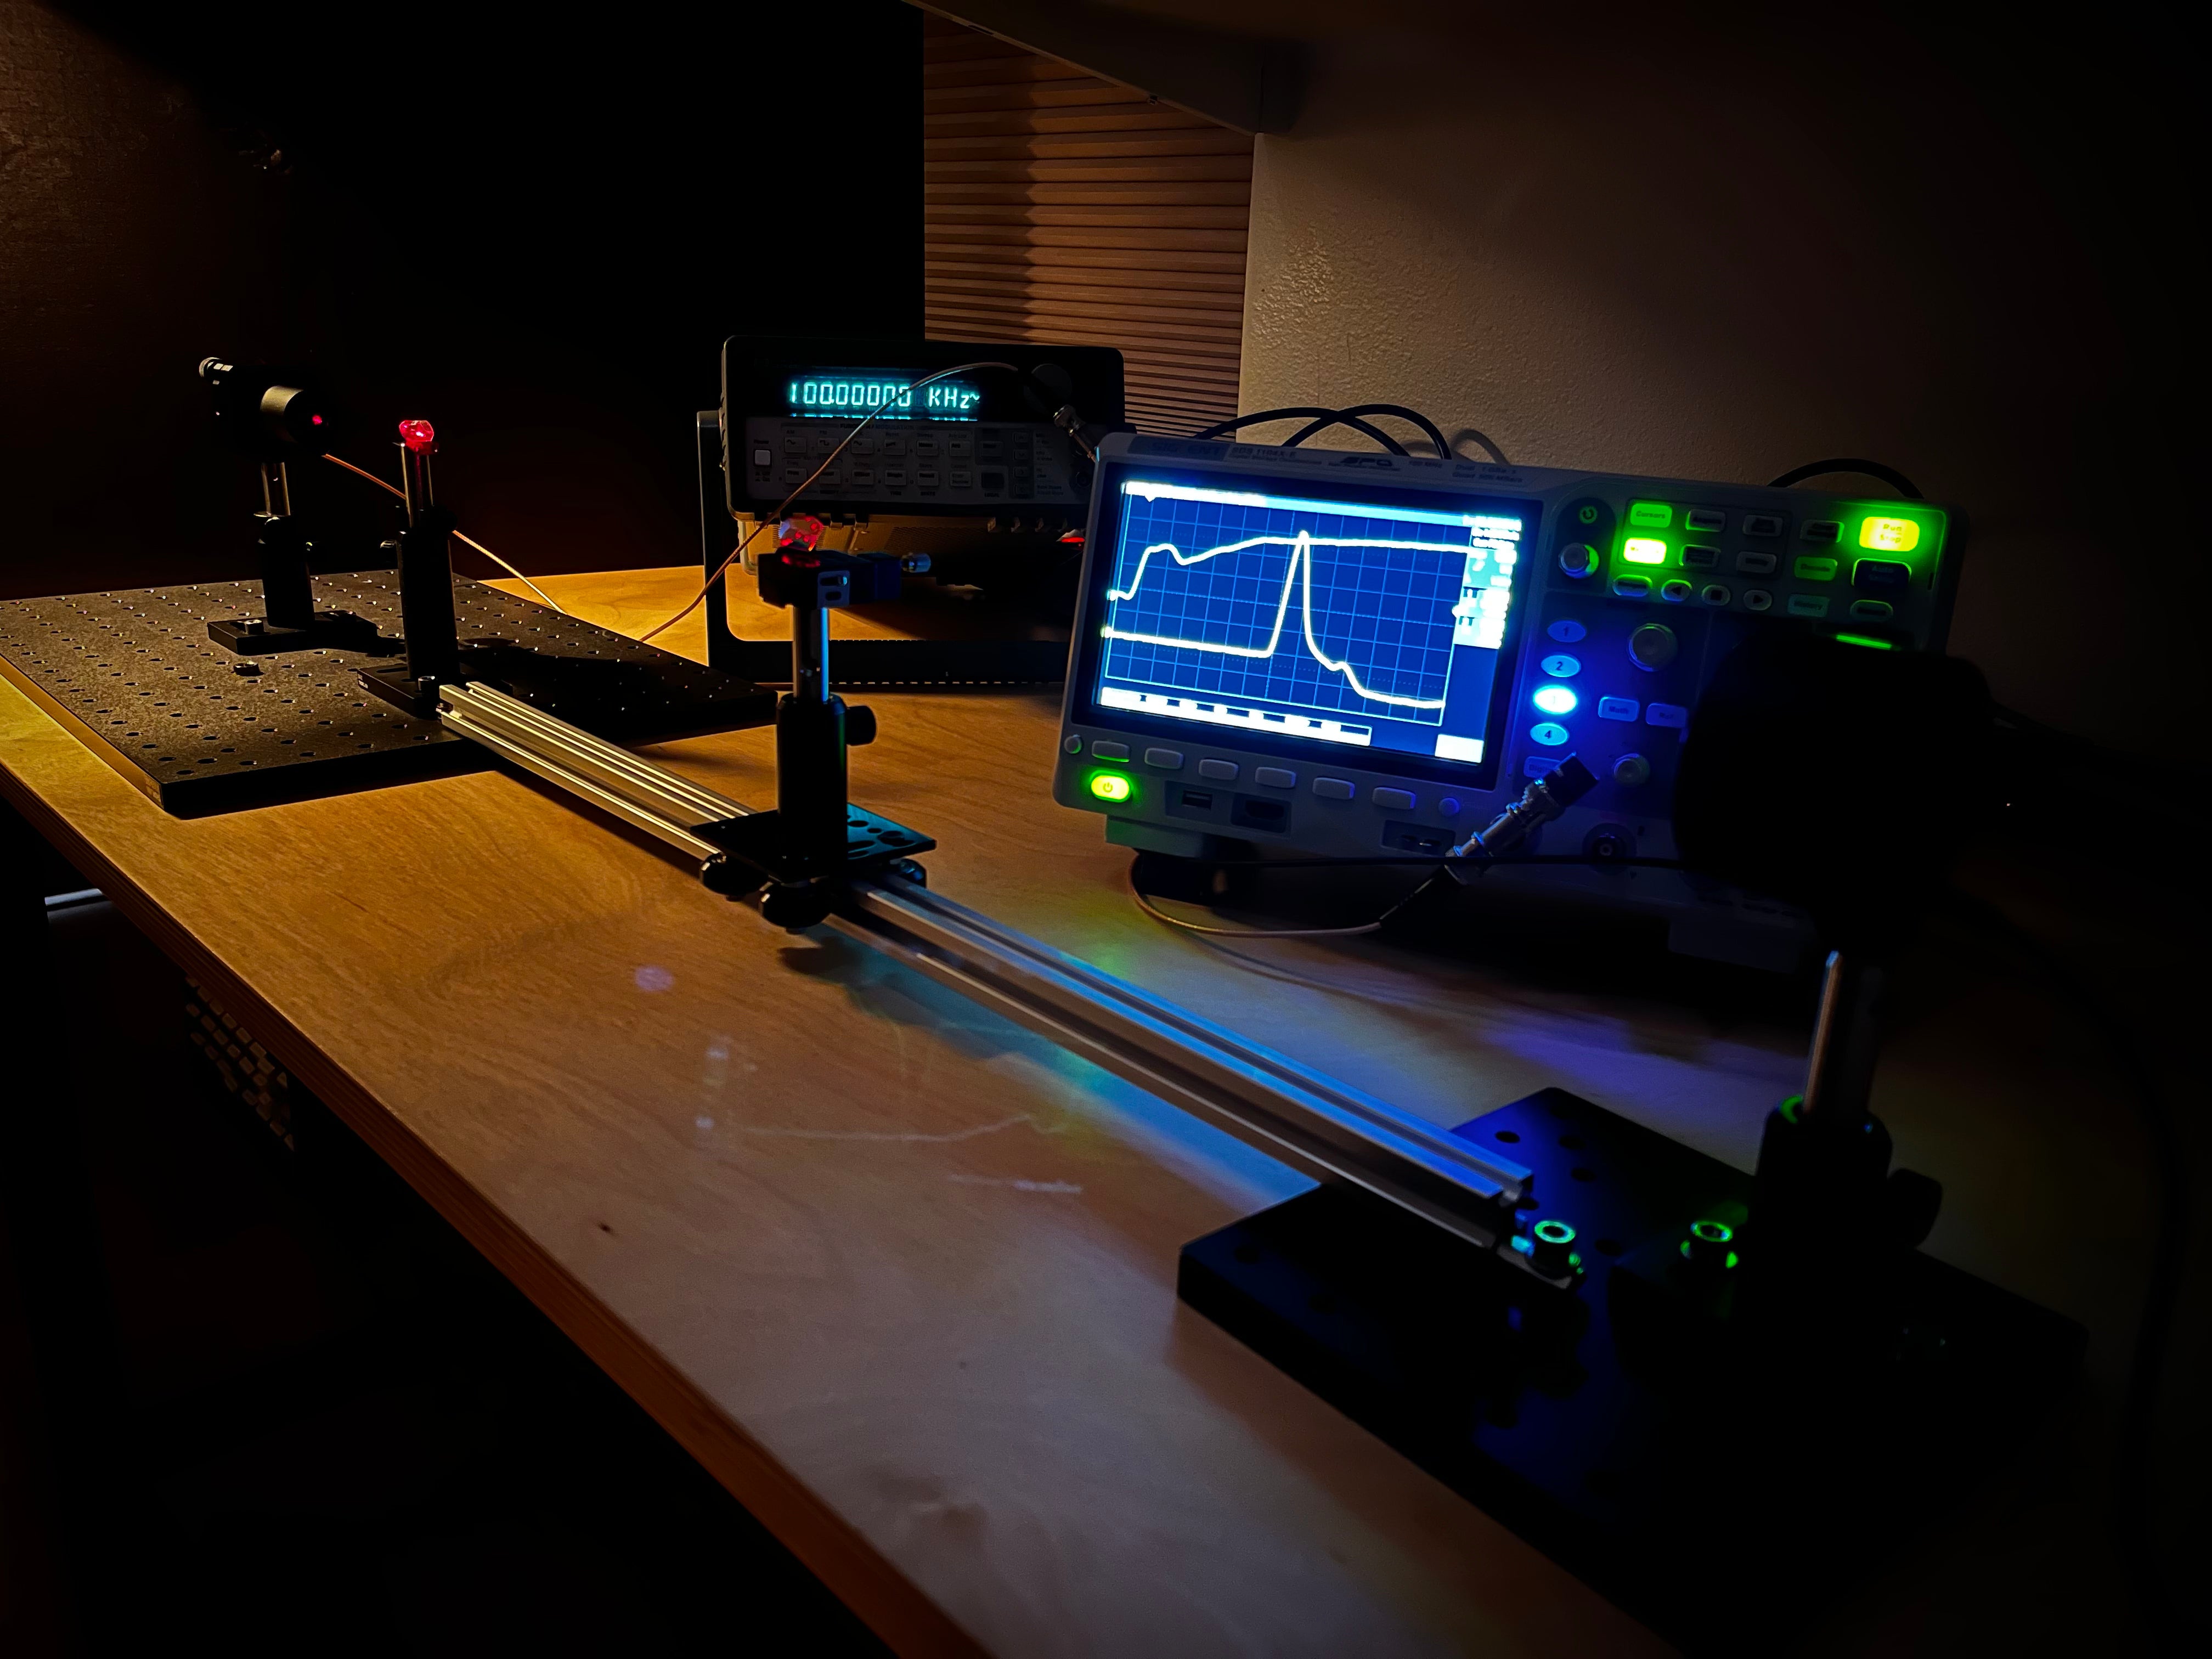 Bench top speed of light measurement using nanosecond pulsed laser diode (NLD-01) and SiPM (SIPM-01) with an optical delay line.